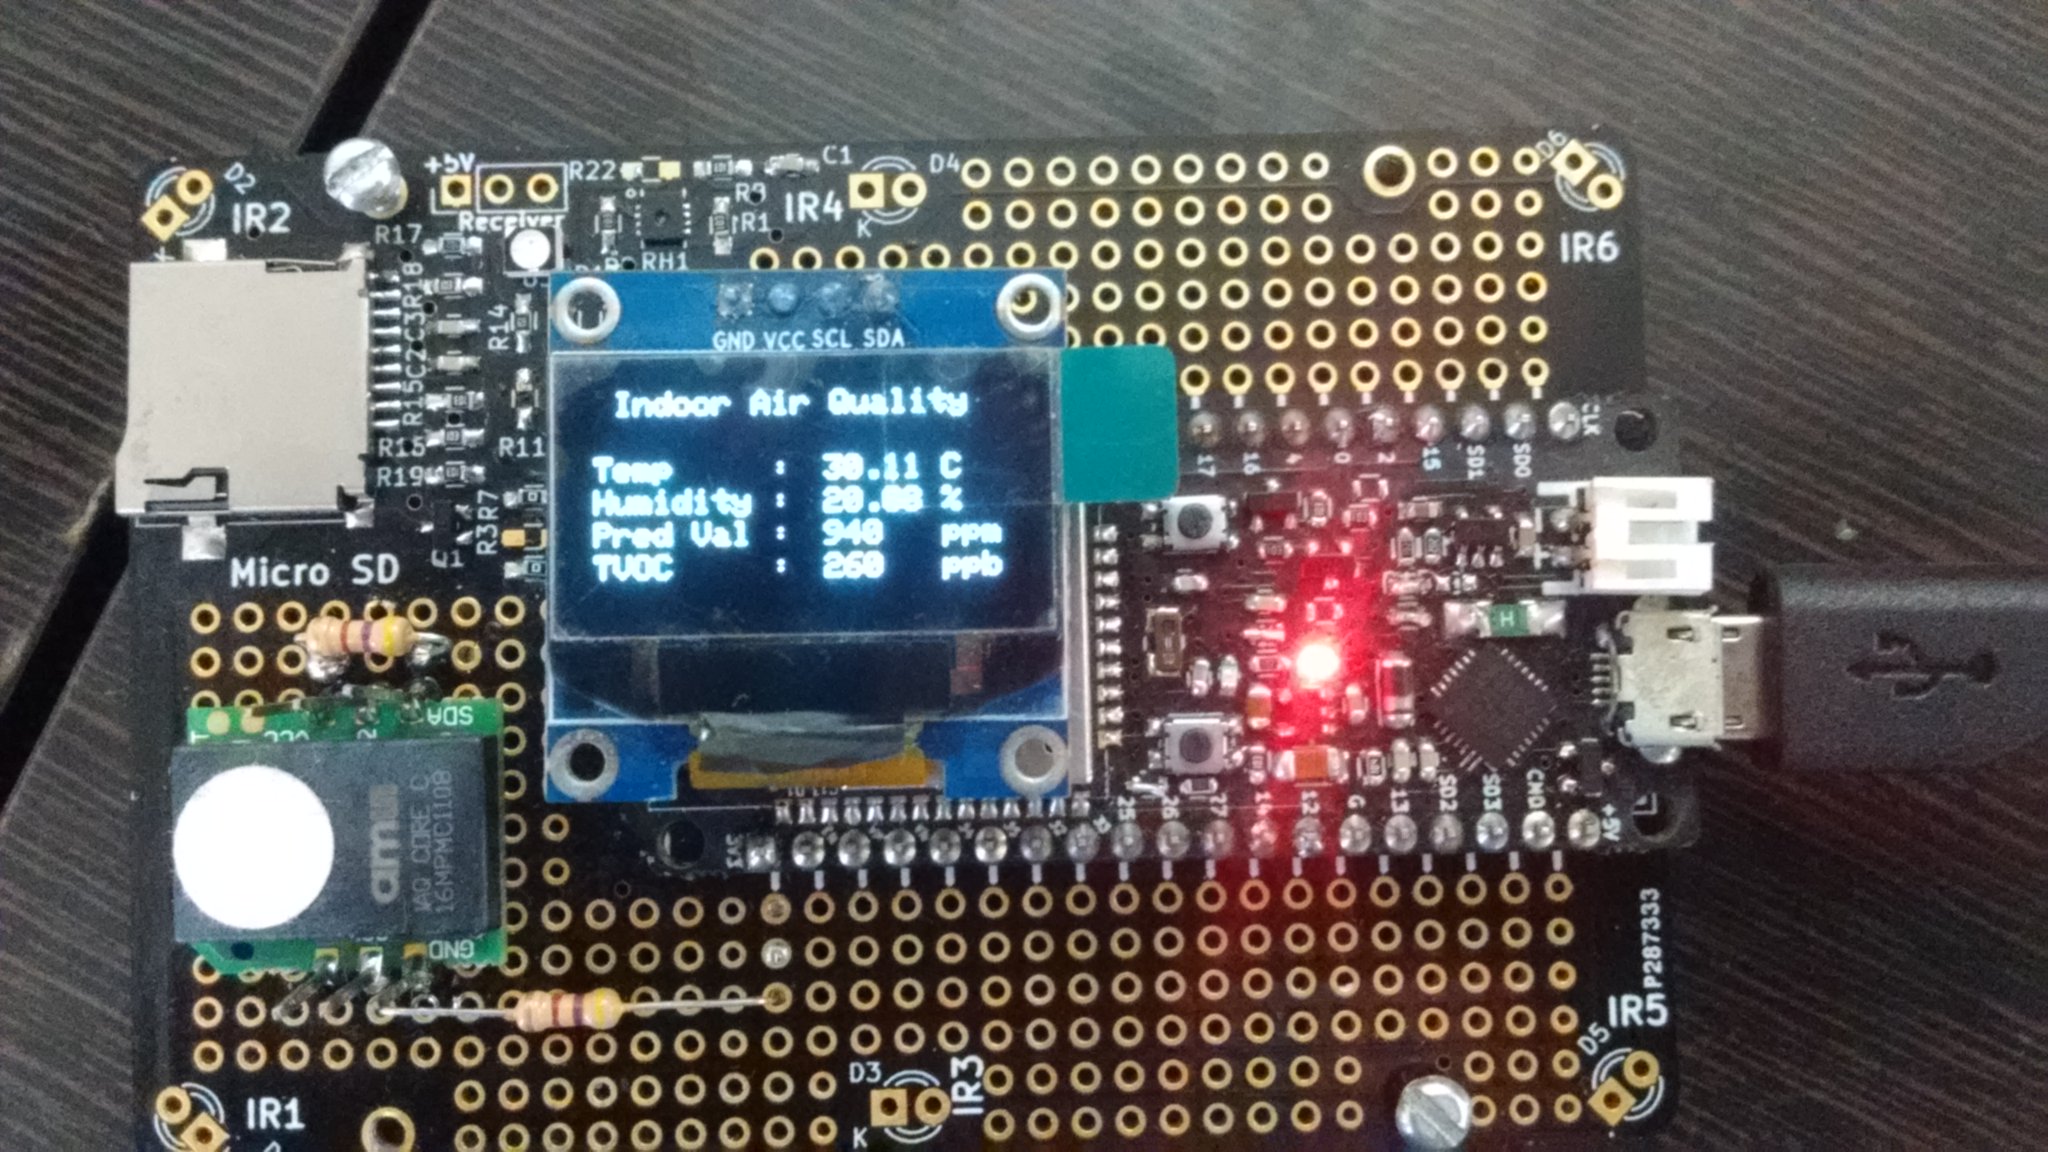 The Internet of Things with ESP32